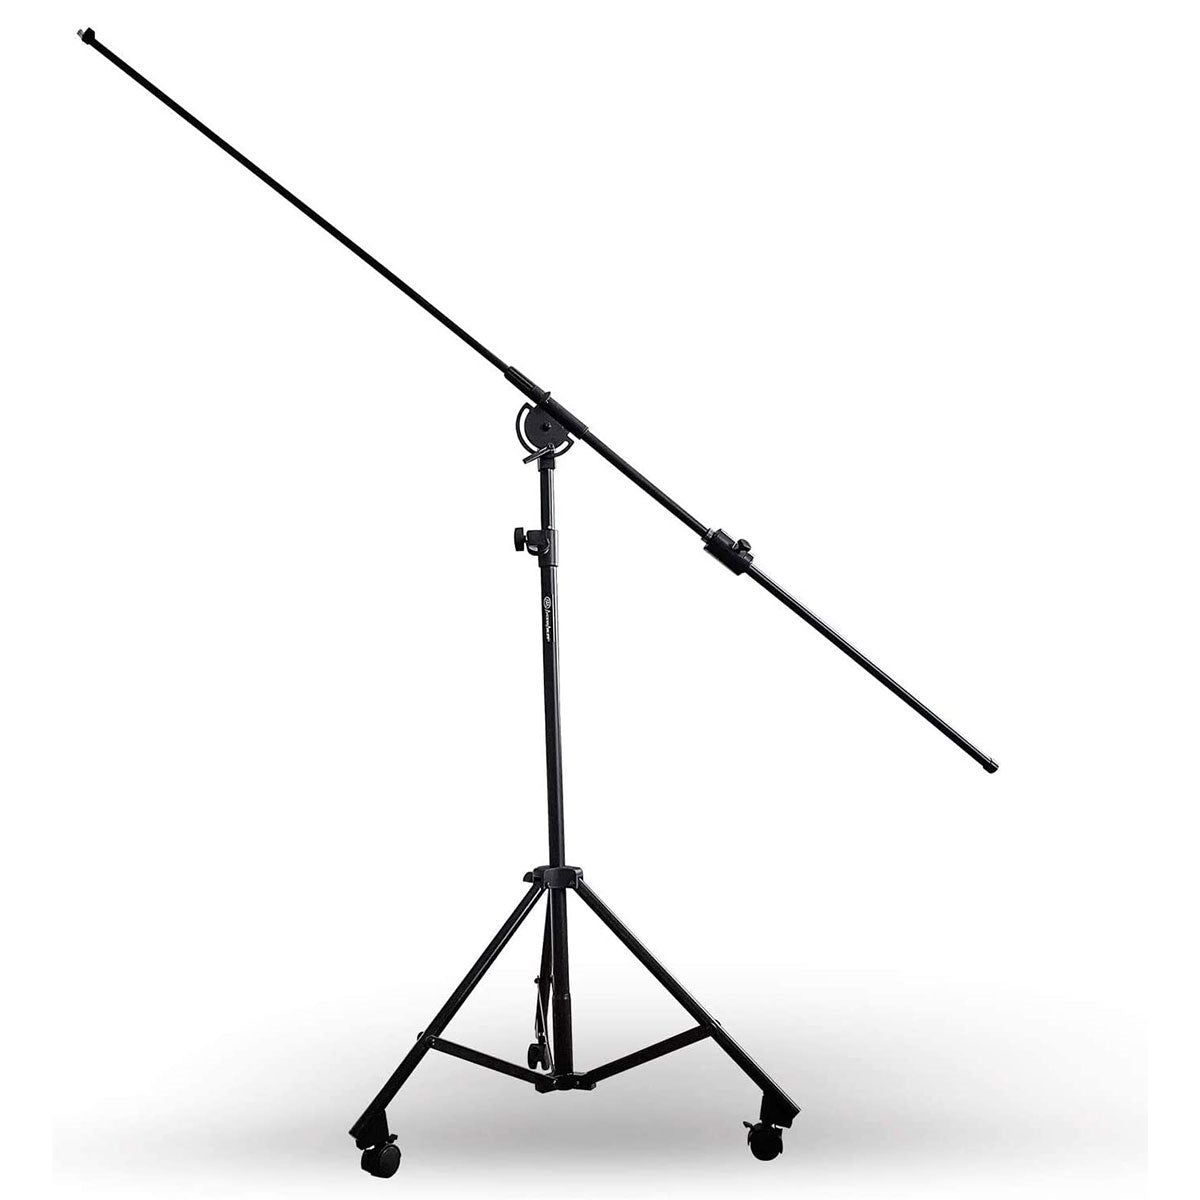 ABS Adjustable Boom Stop to keep your microphone safe.